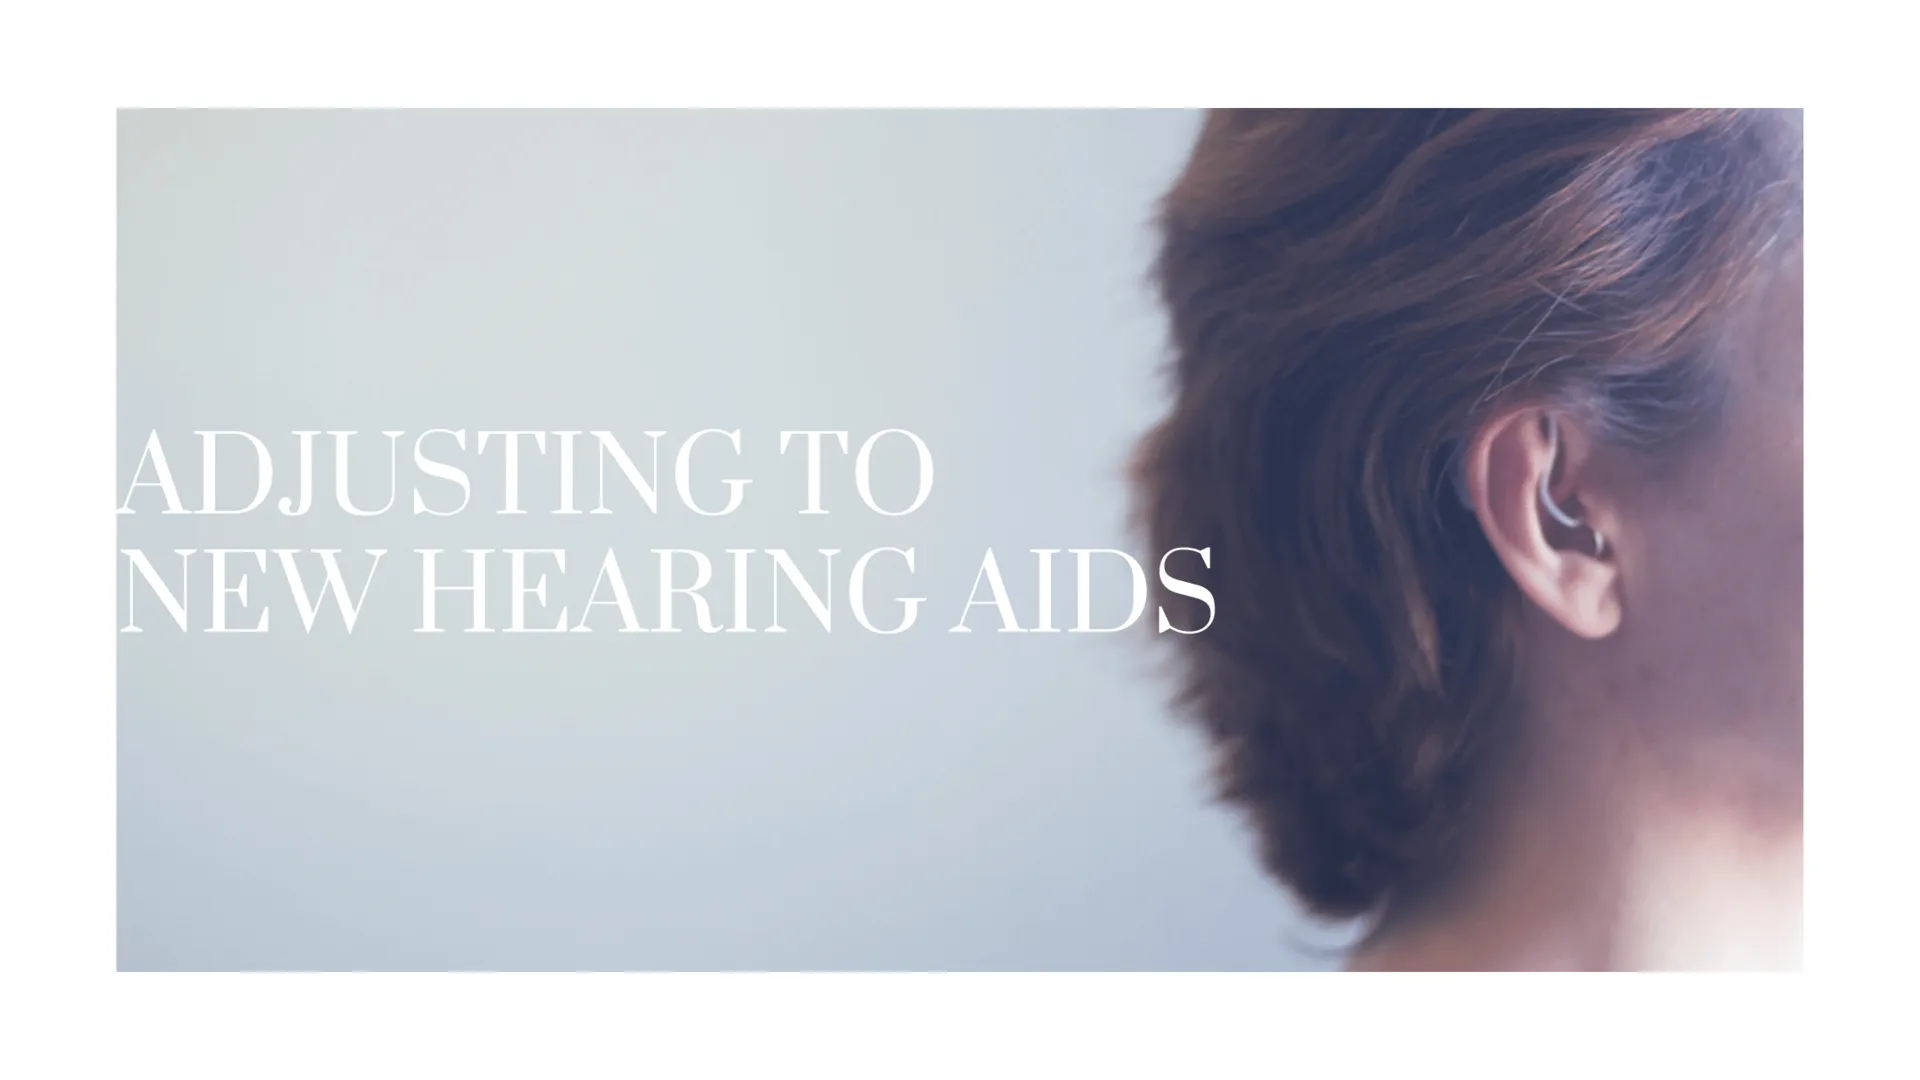 Adjusting to New Hearing Aids